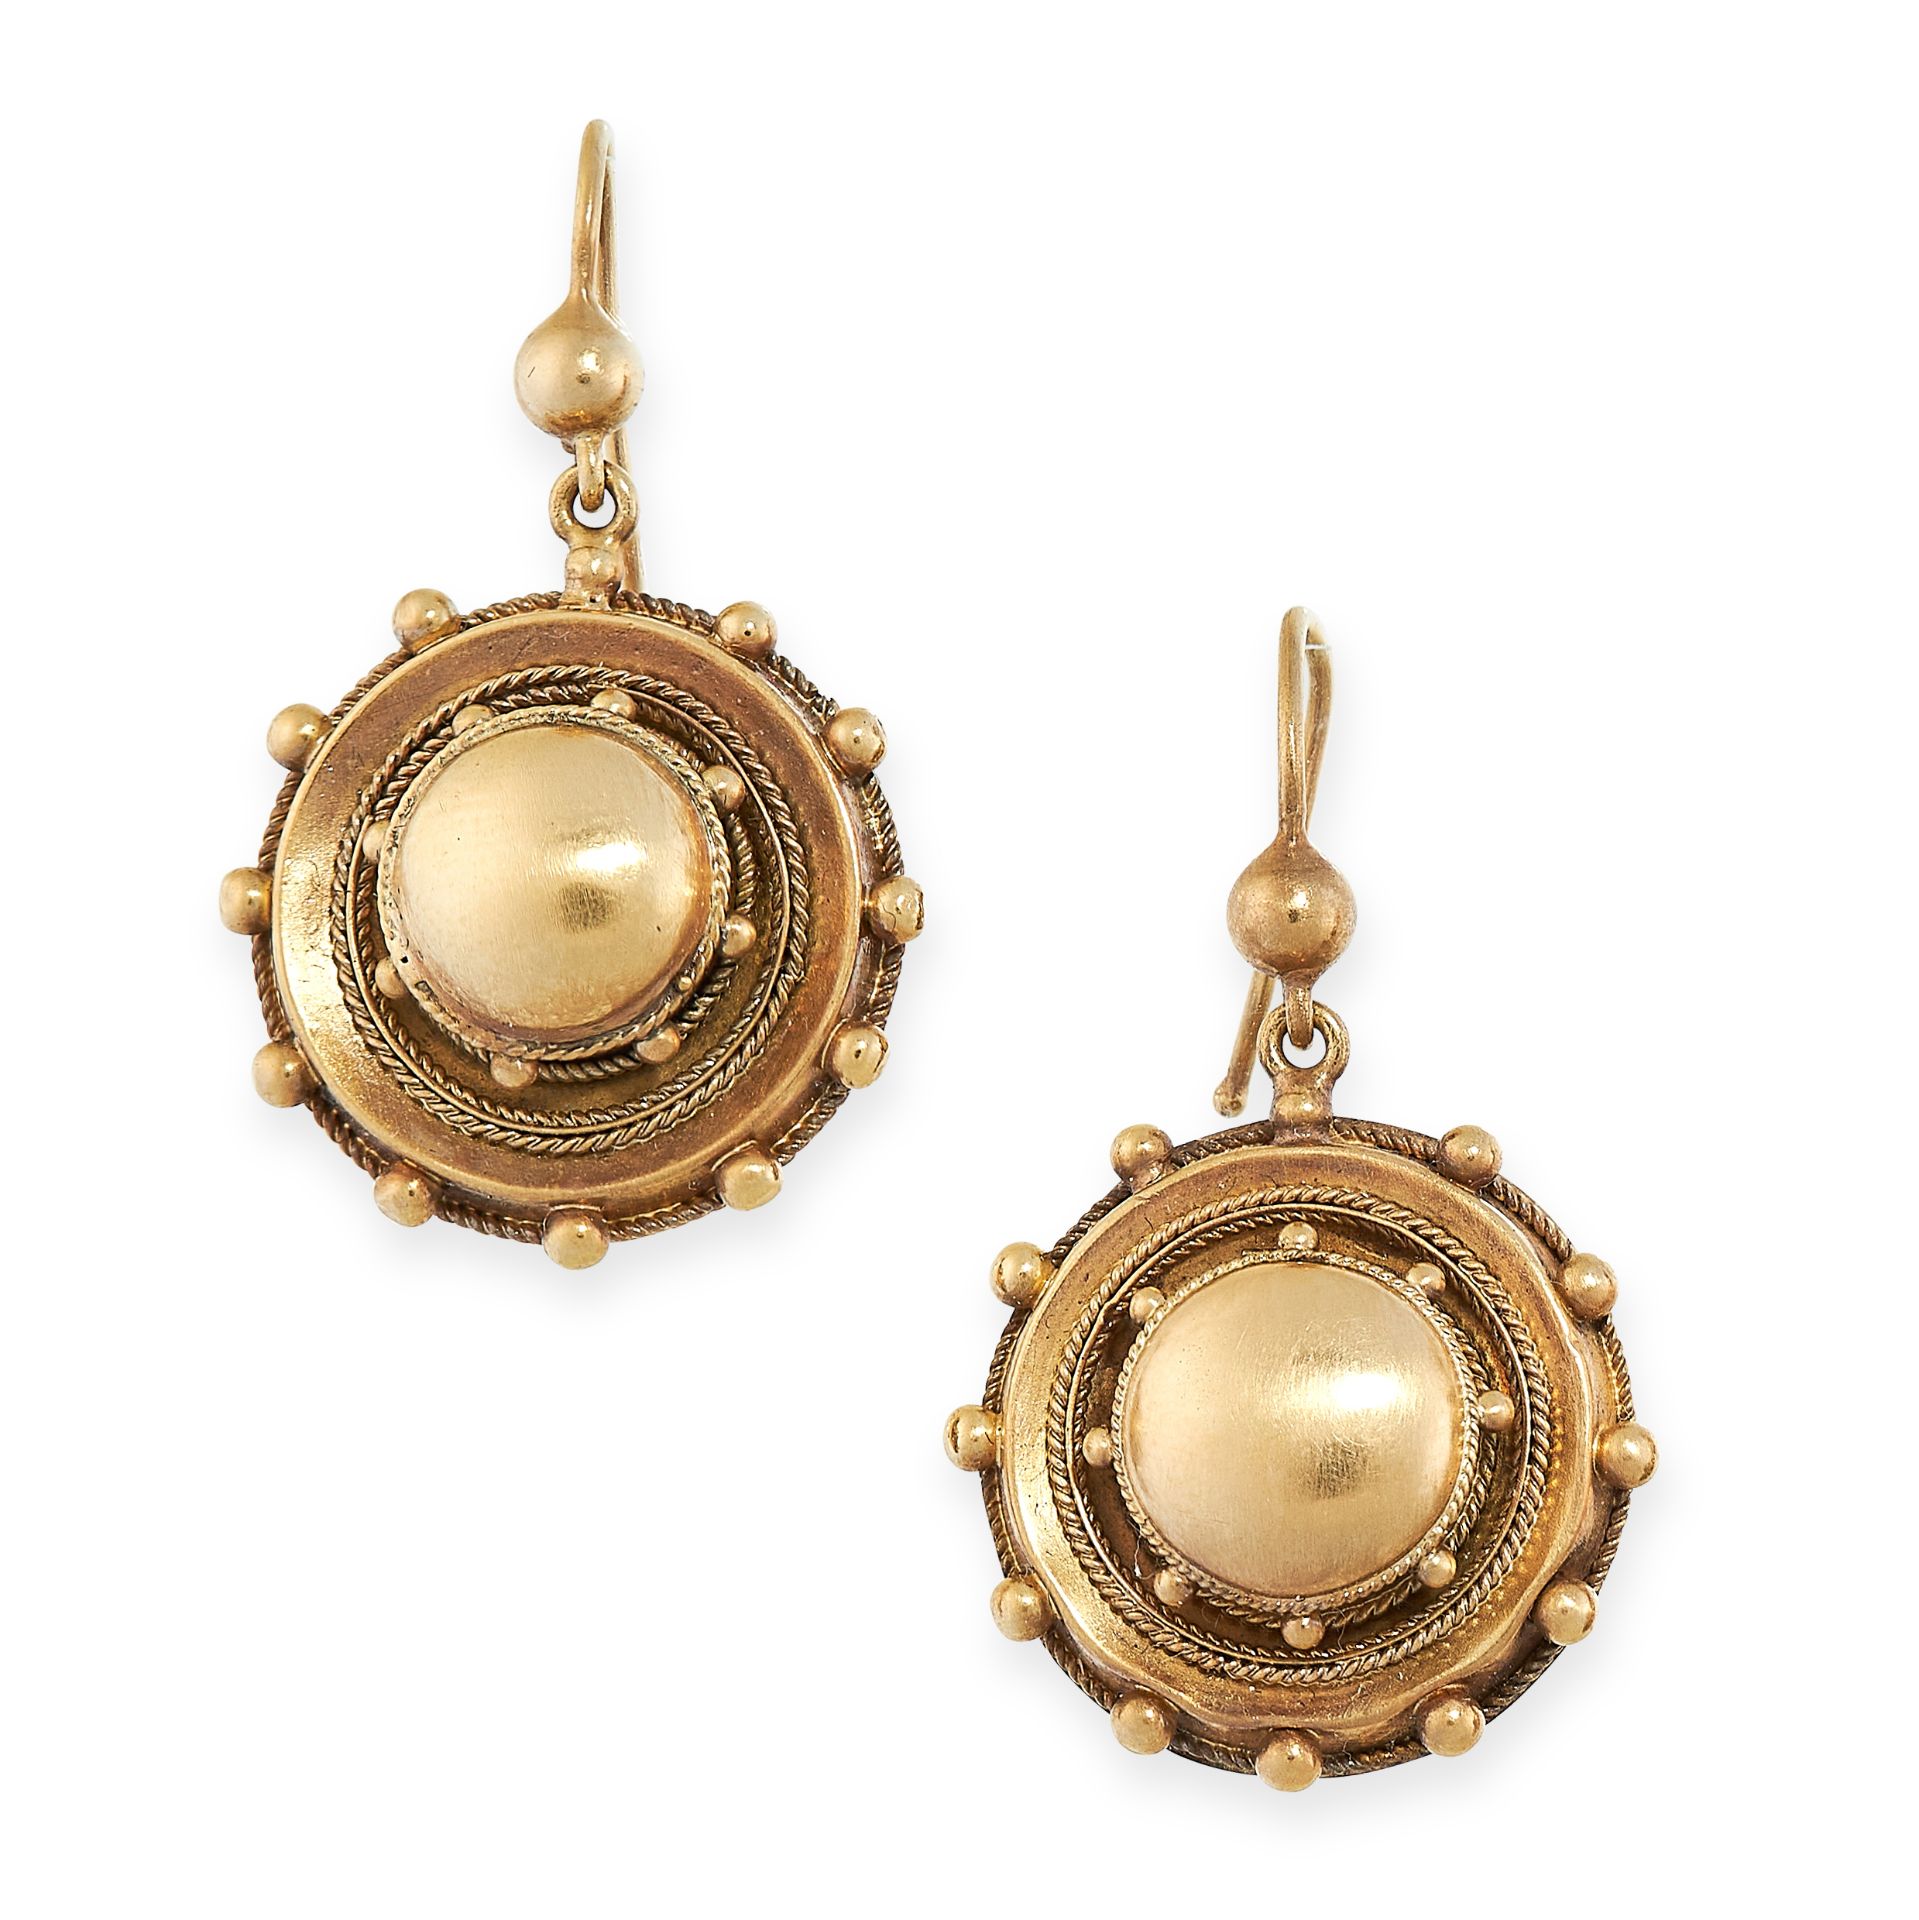 PAIR OF ANTIQUE EARRINGS, 19TH CENTURY mounted in yellow gold, in the revivalist manner, of circular